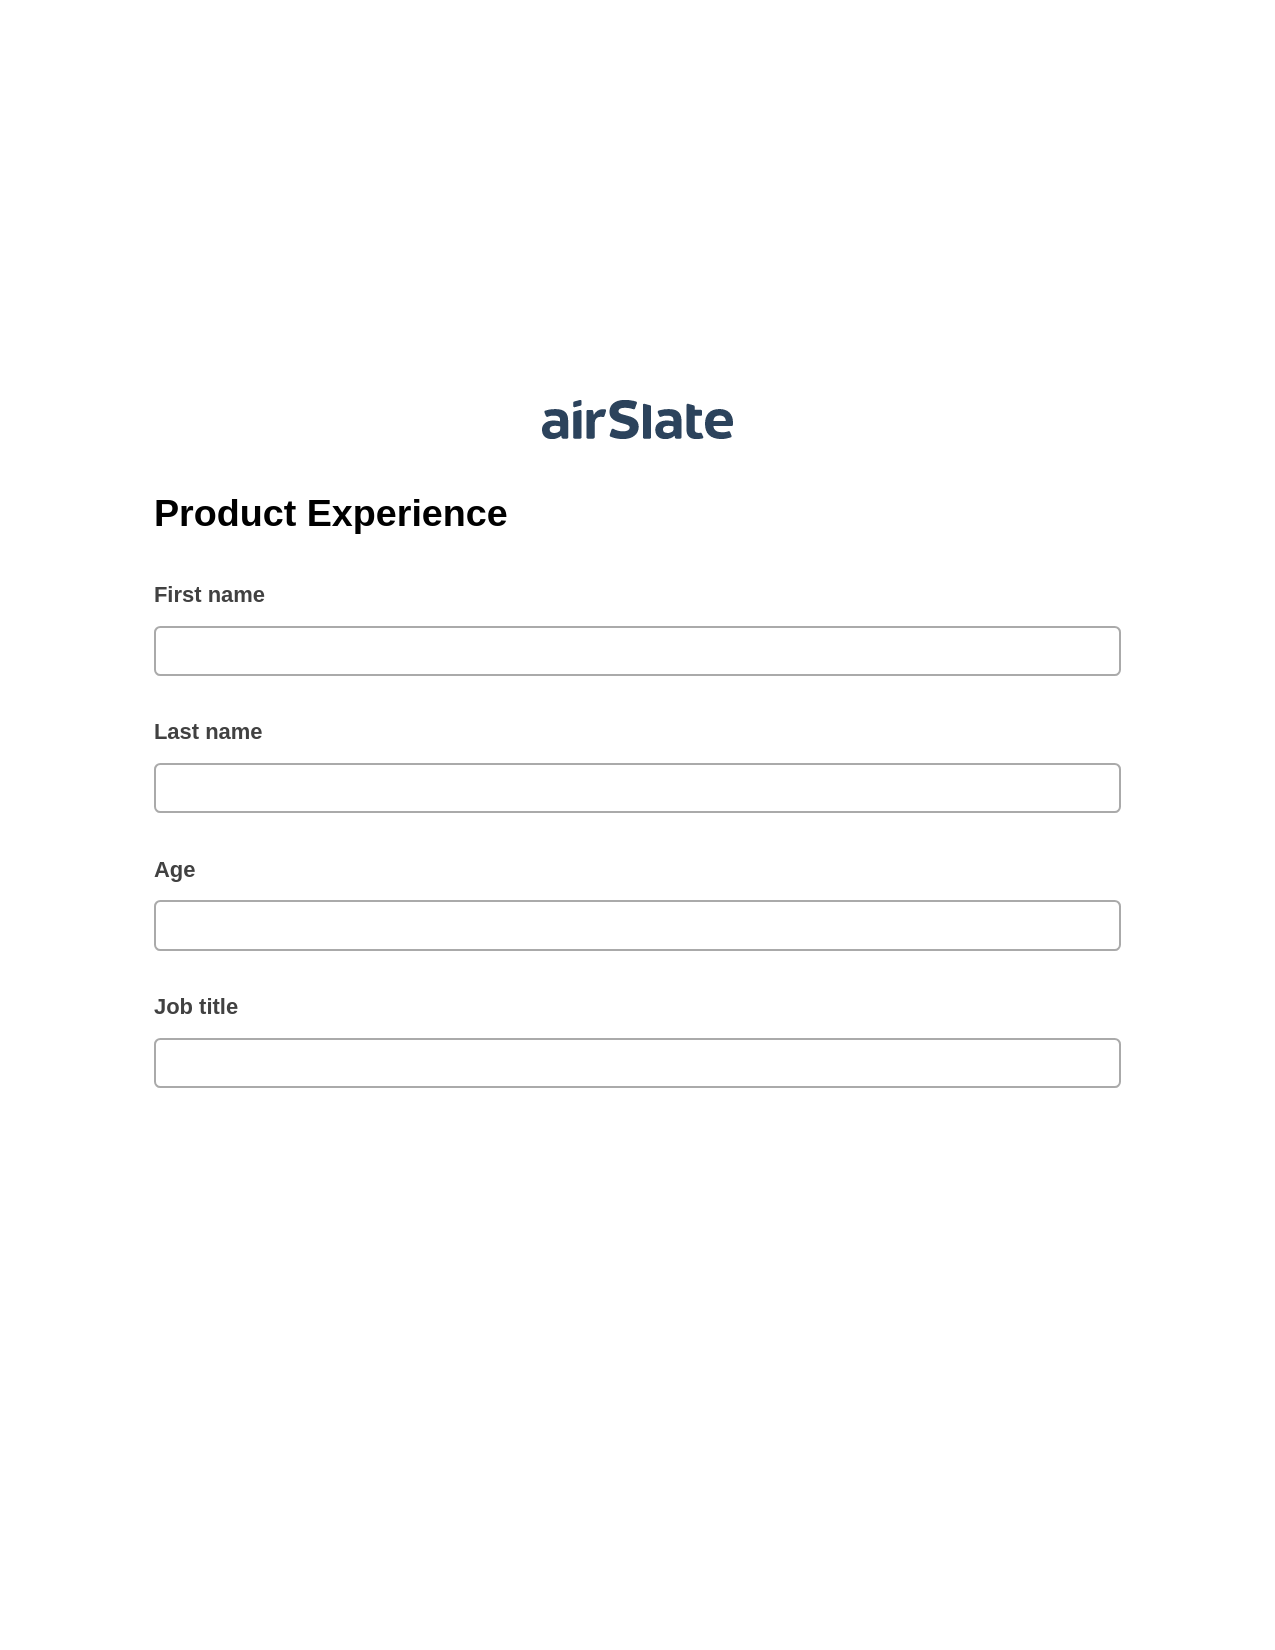 Product Experience Pre-fill from MS Dynamics 365 Records, Create slate bot, Archive to Dropbox Bot